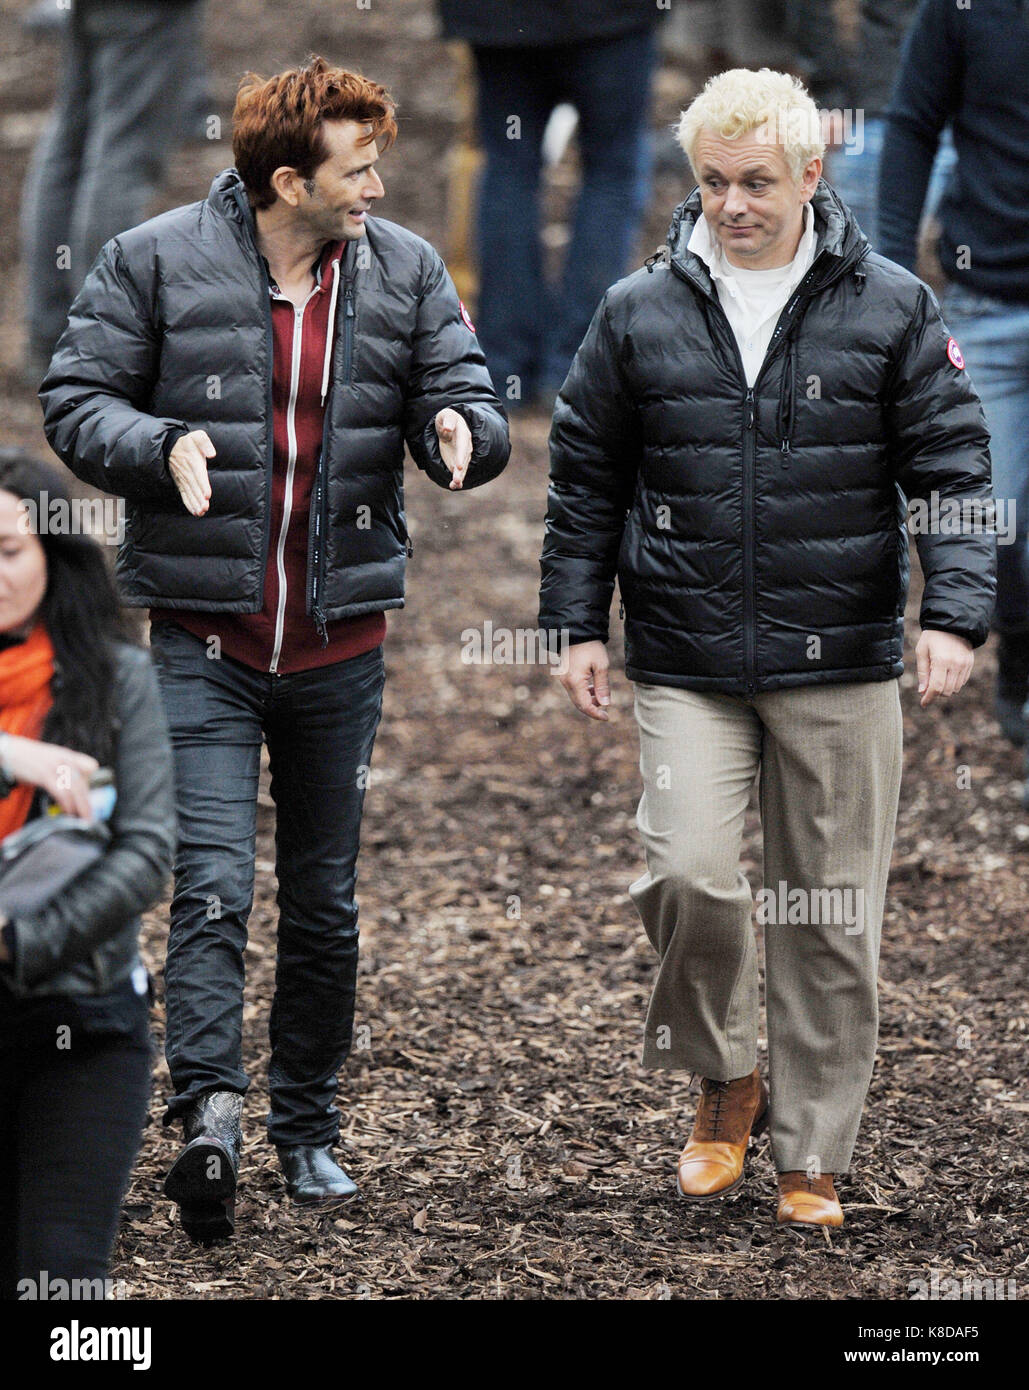 Michael Sheen (right) with co-star David Tennant (left) during rehearsals  for Good Omens, based on the book by Terry Pratchett, in St James's Park,  central London Stock Photo - Alamy